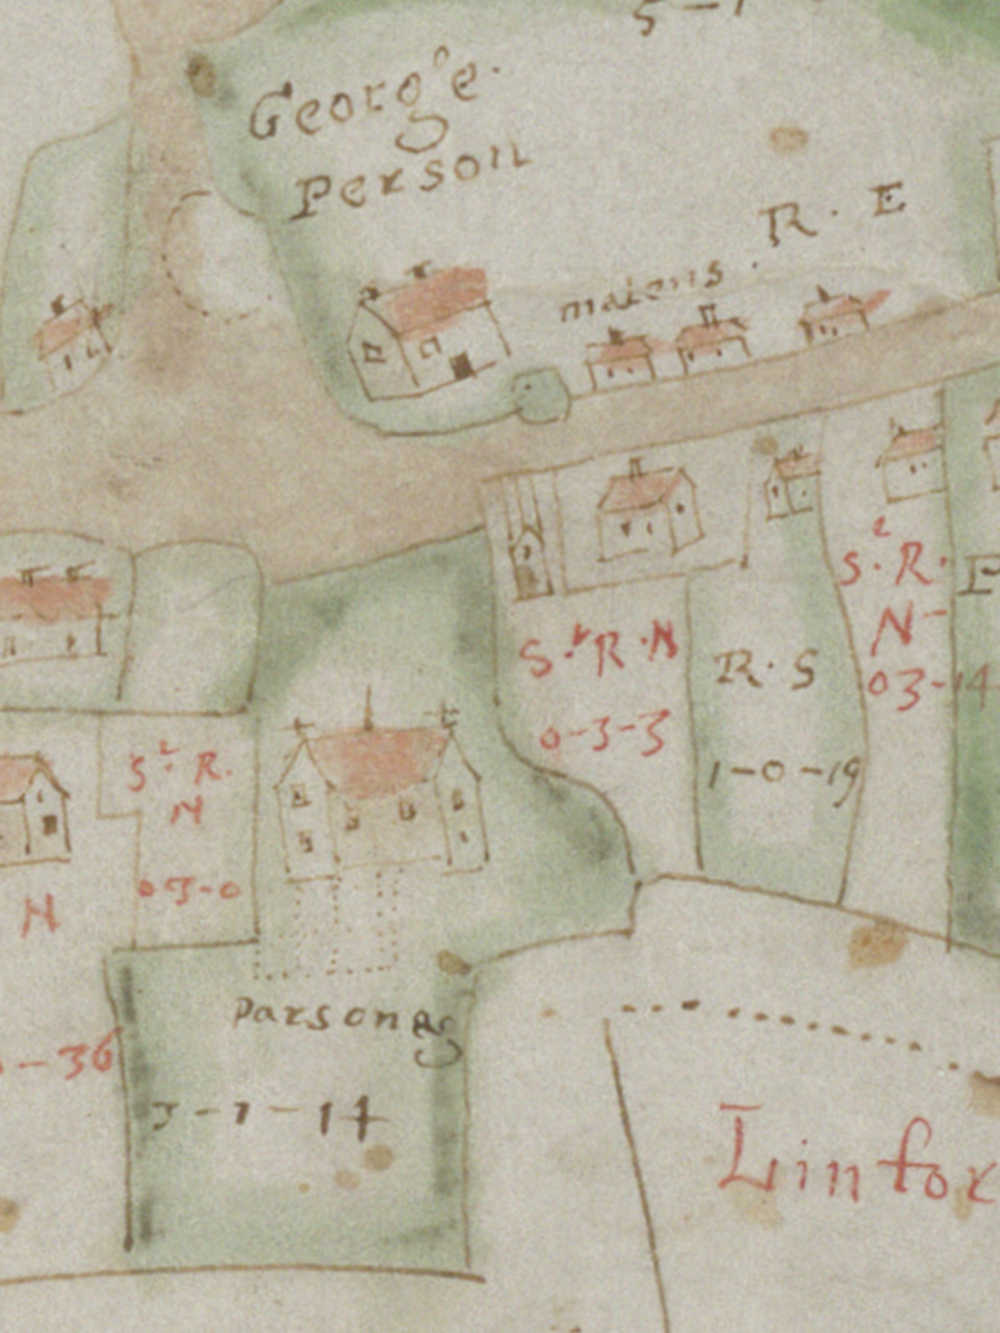 1641 Estate map of Great Linford showing a building on the plot occupied by the Nags Head public house.